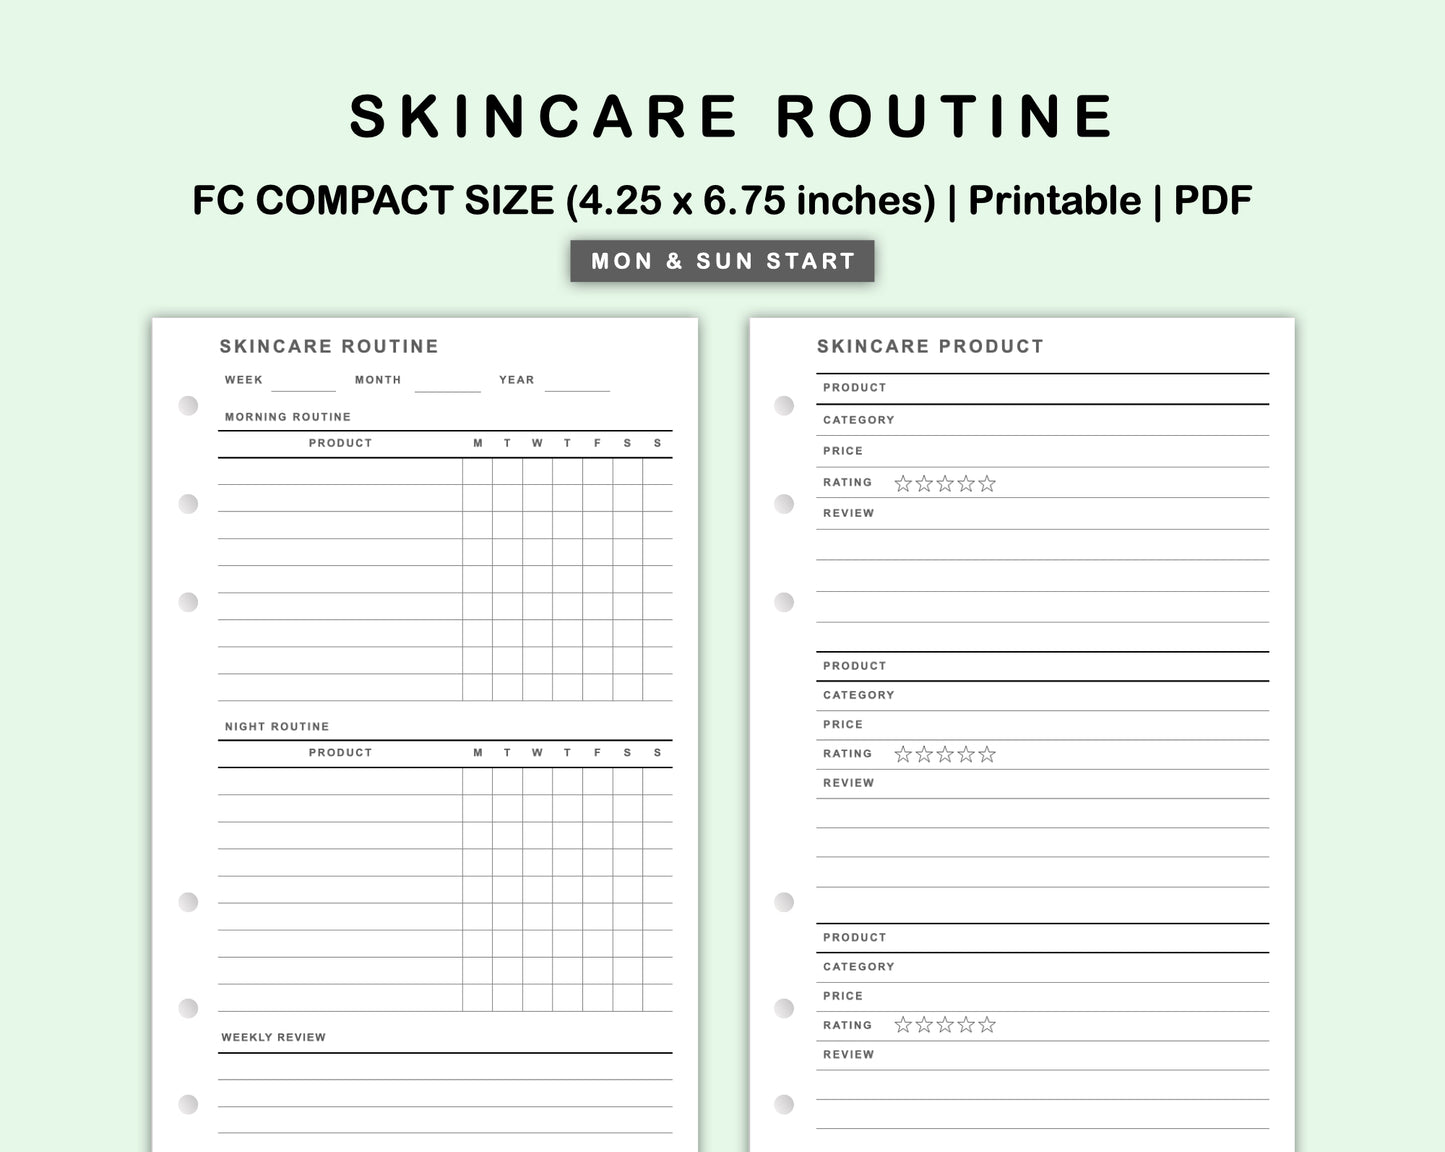 FC Compact Inserts - Skincare Routine